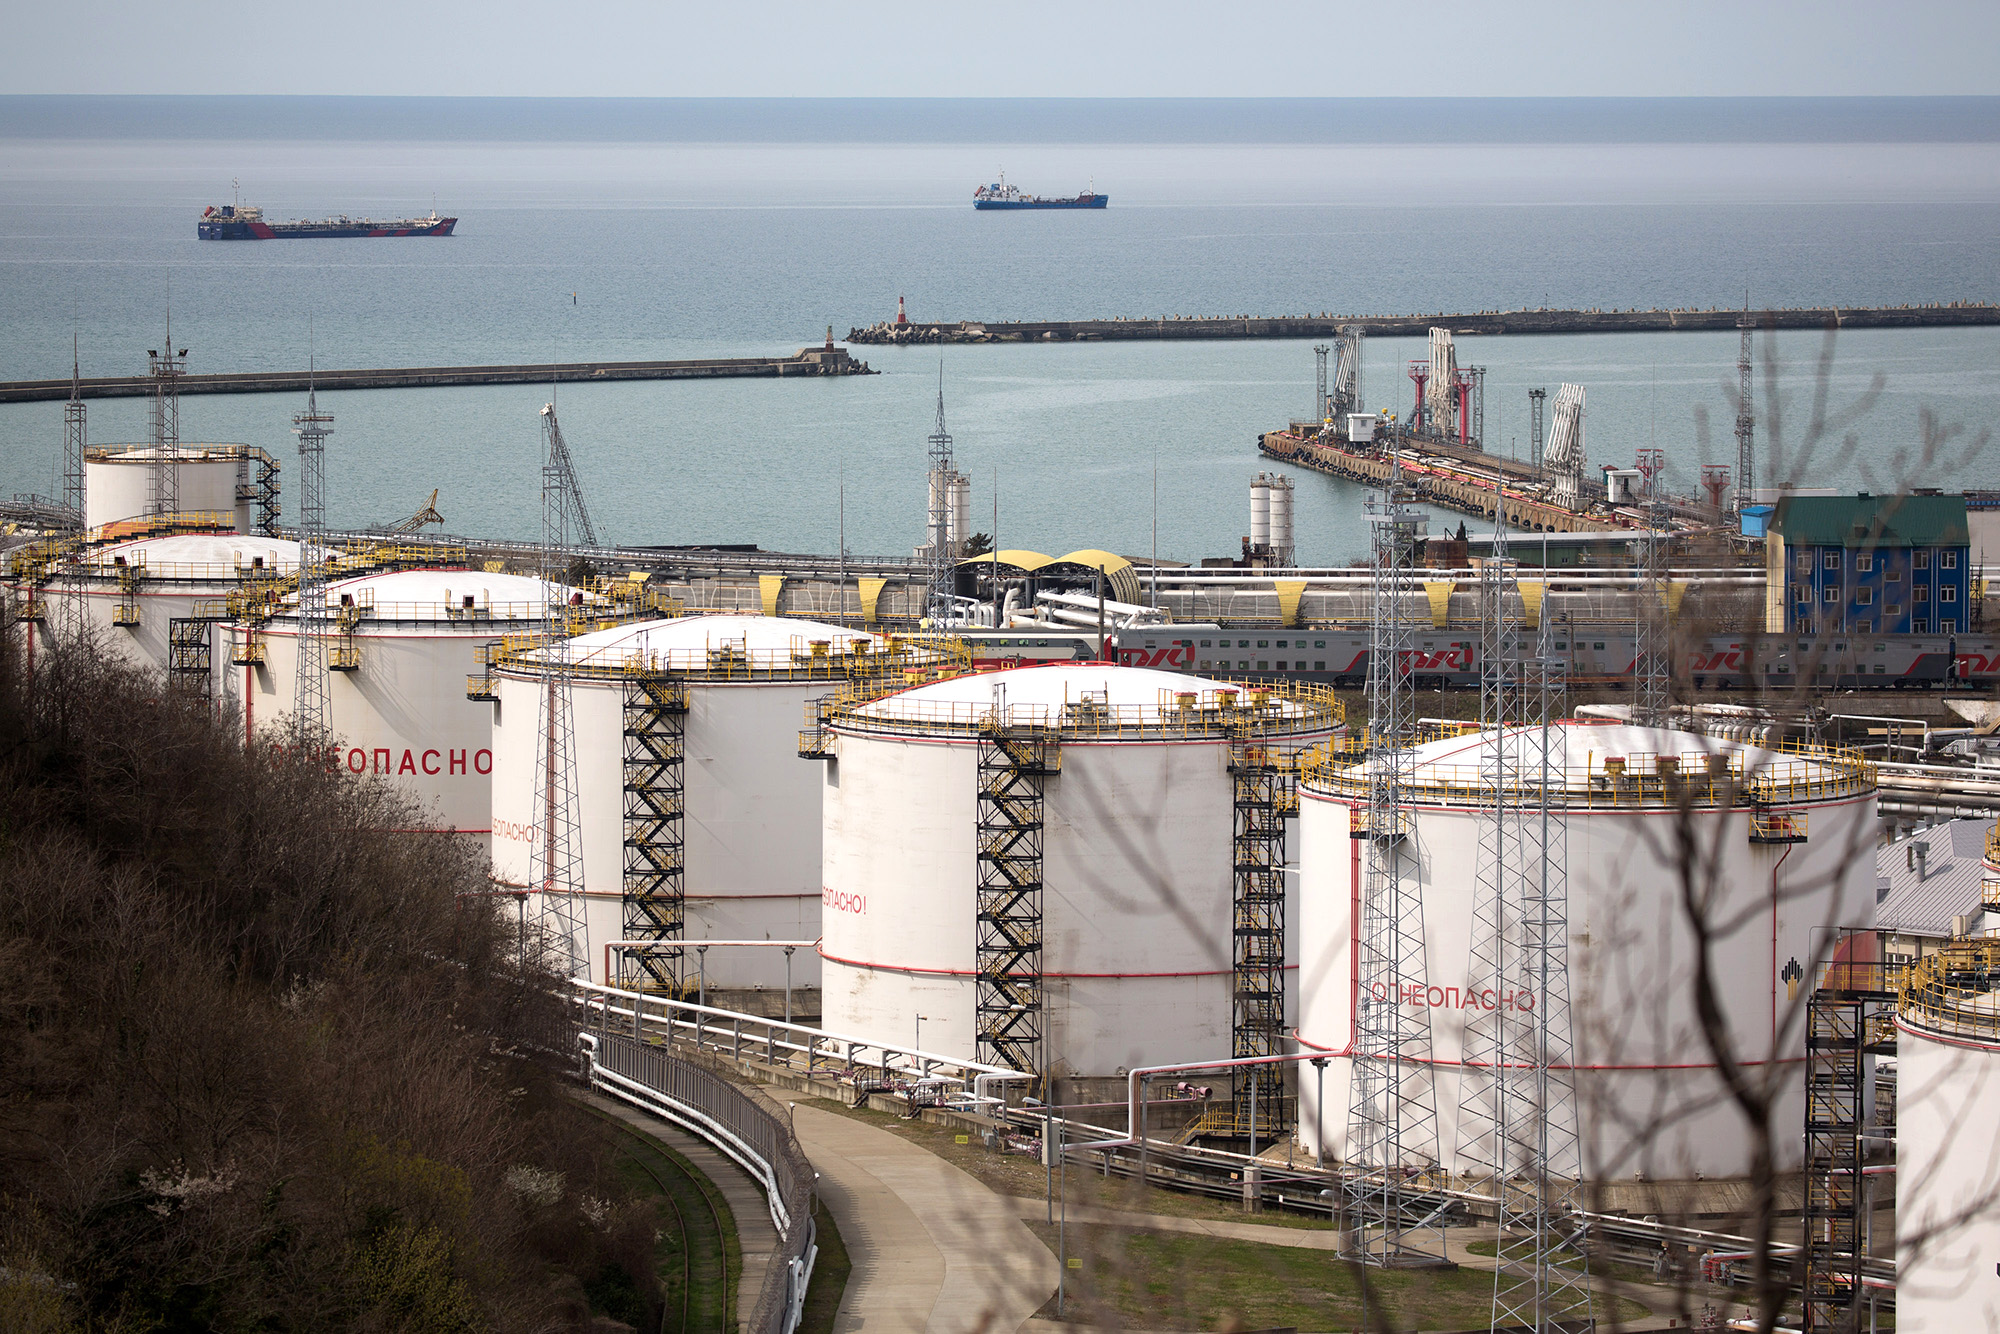 Oil storage tanks stand at the RN-Tuapsinsky refinery, operated by Rosneft Oil Co., as tankers sail beyond in Tuapse, Russia, on March 23, 2020.